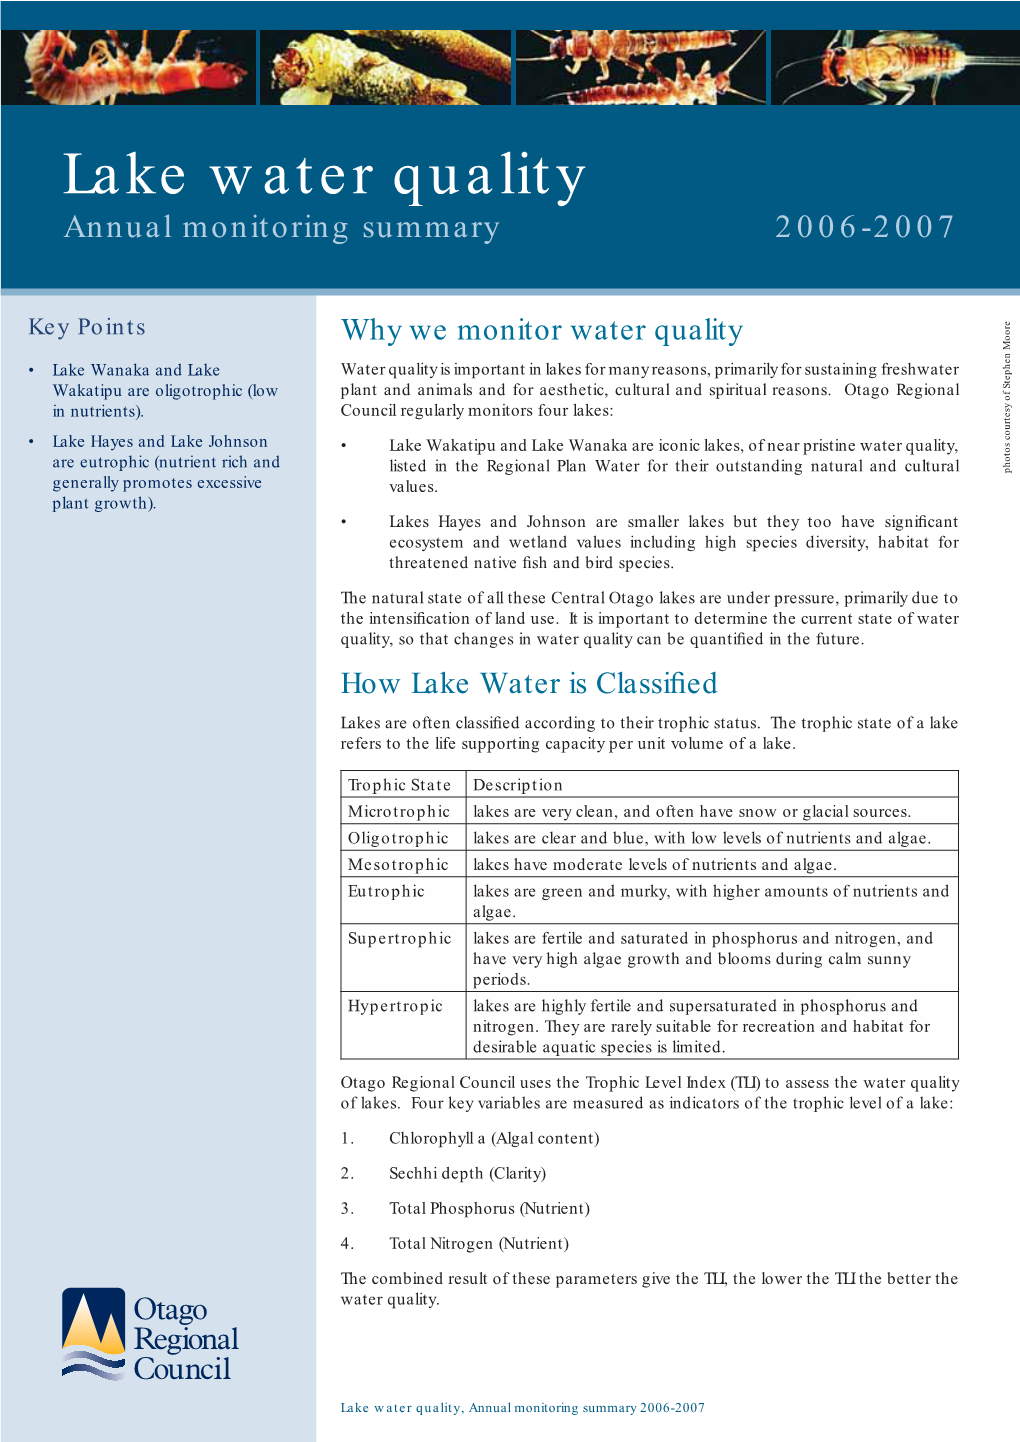 Lake Water Quality Annual Monitoring Summary 2006-2007